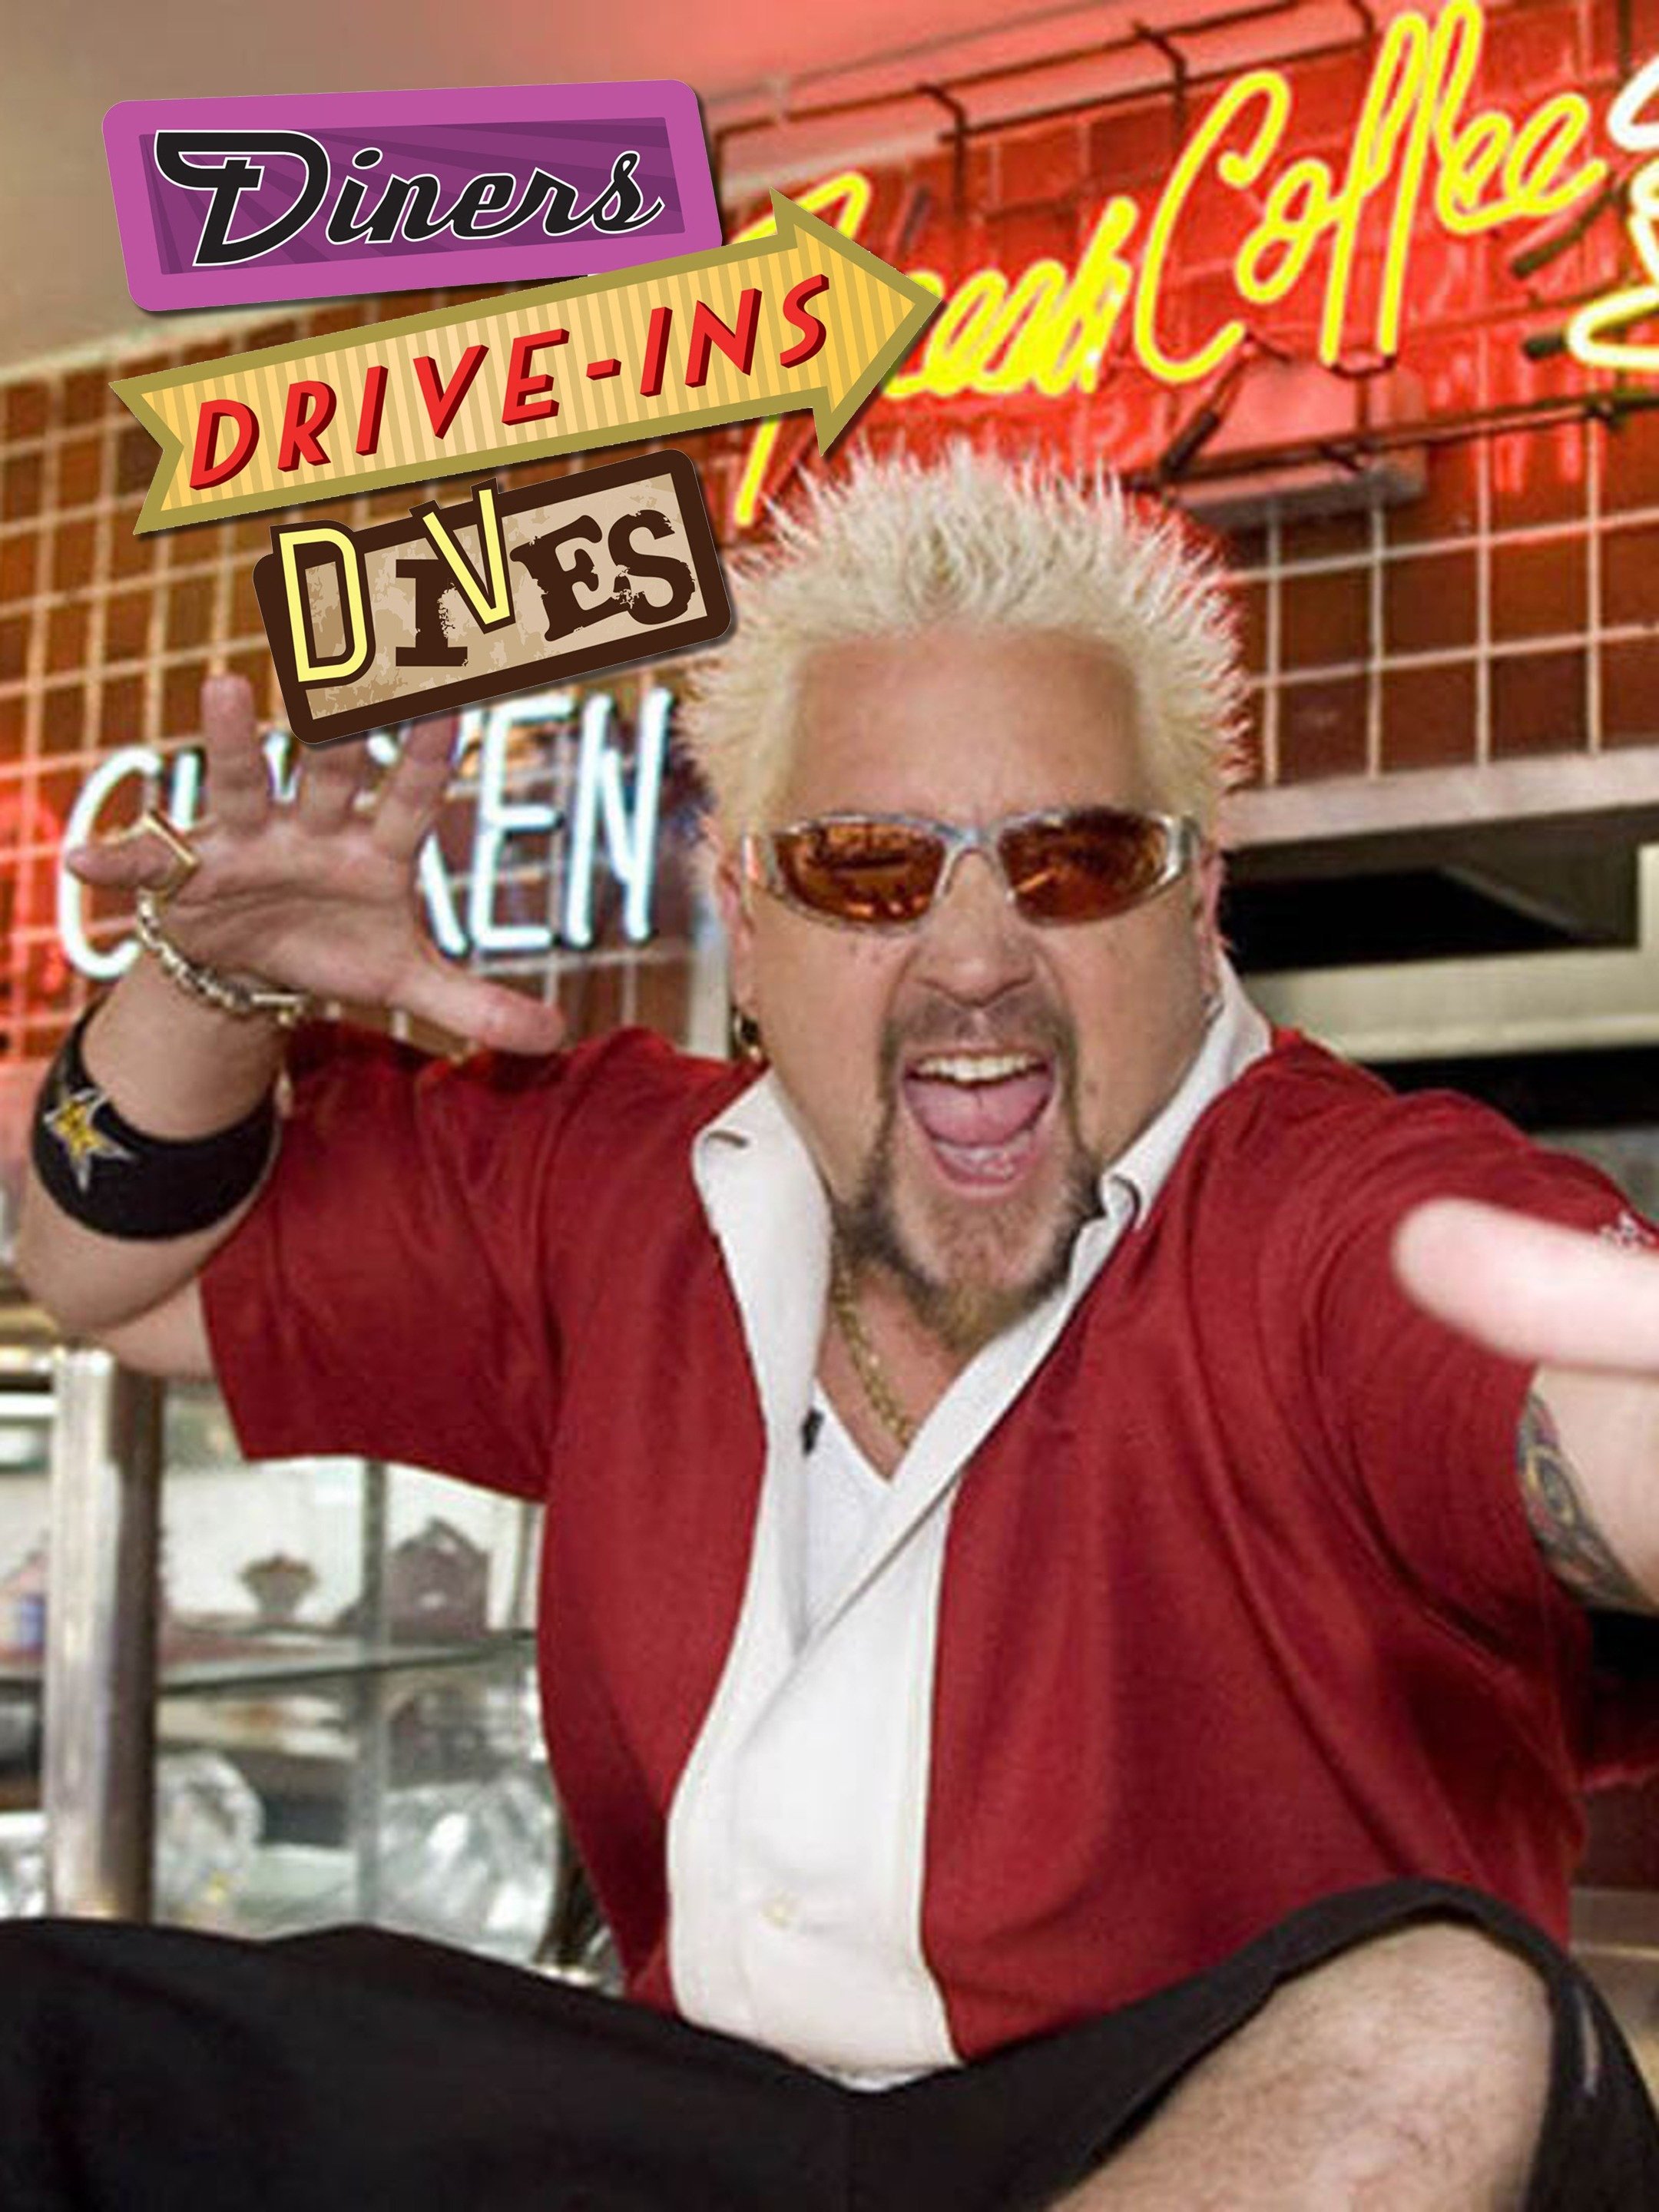 Reno diners drive ins and dives